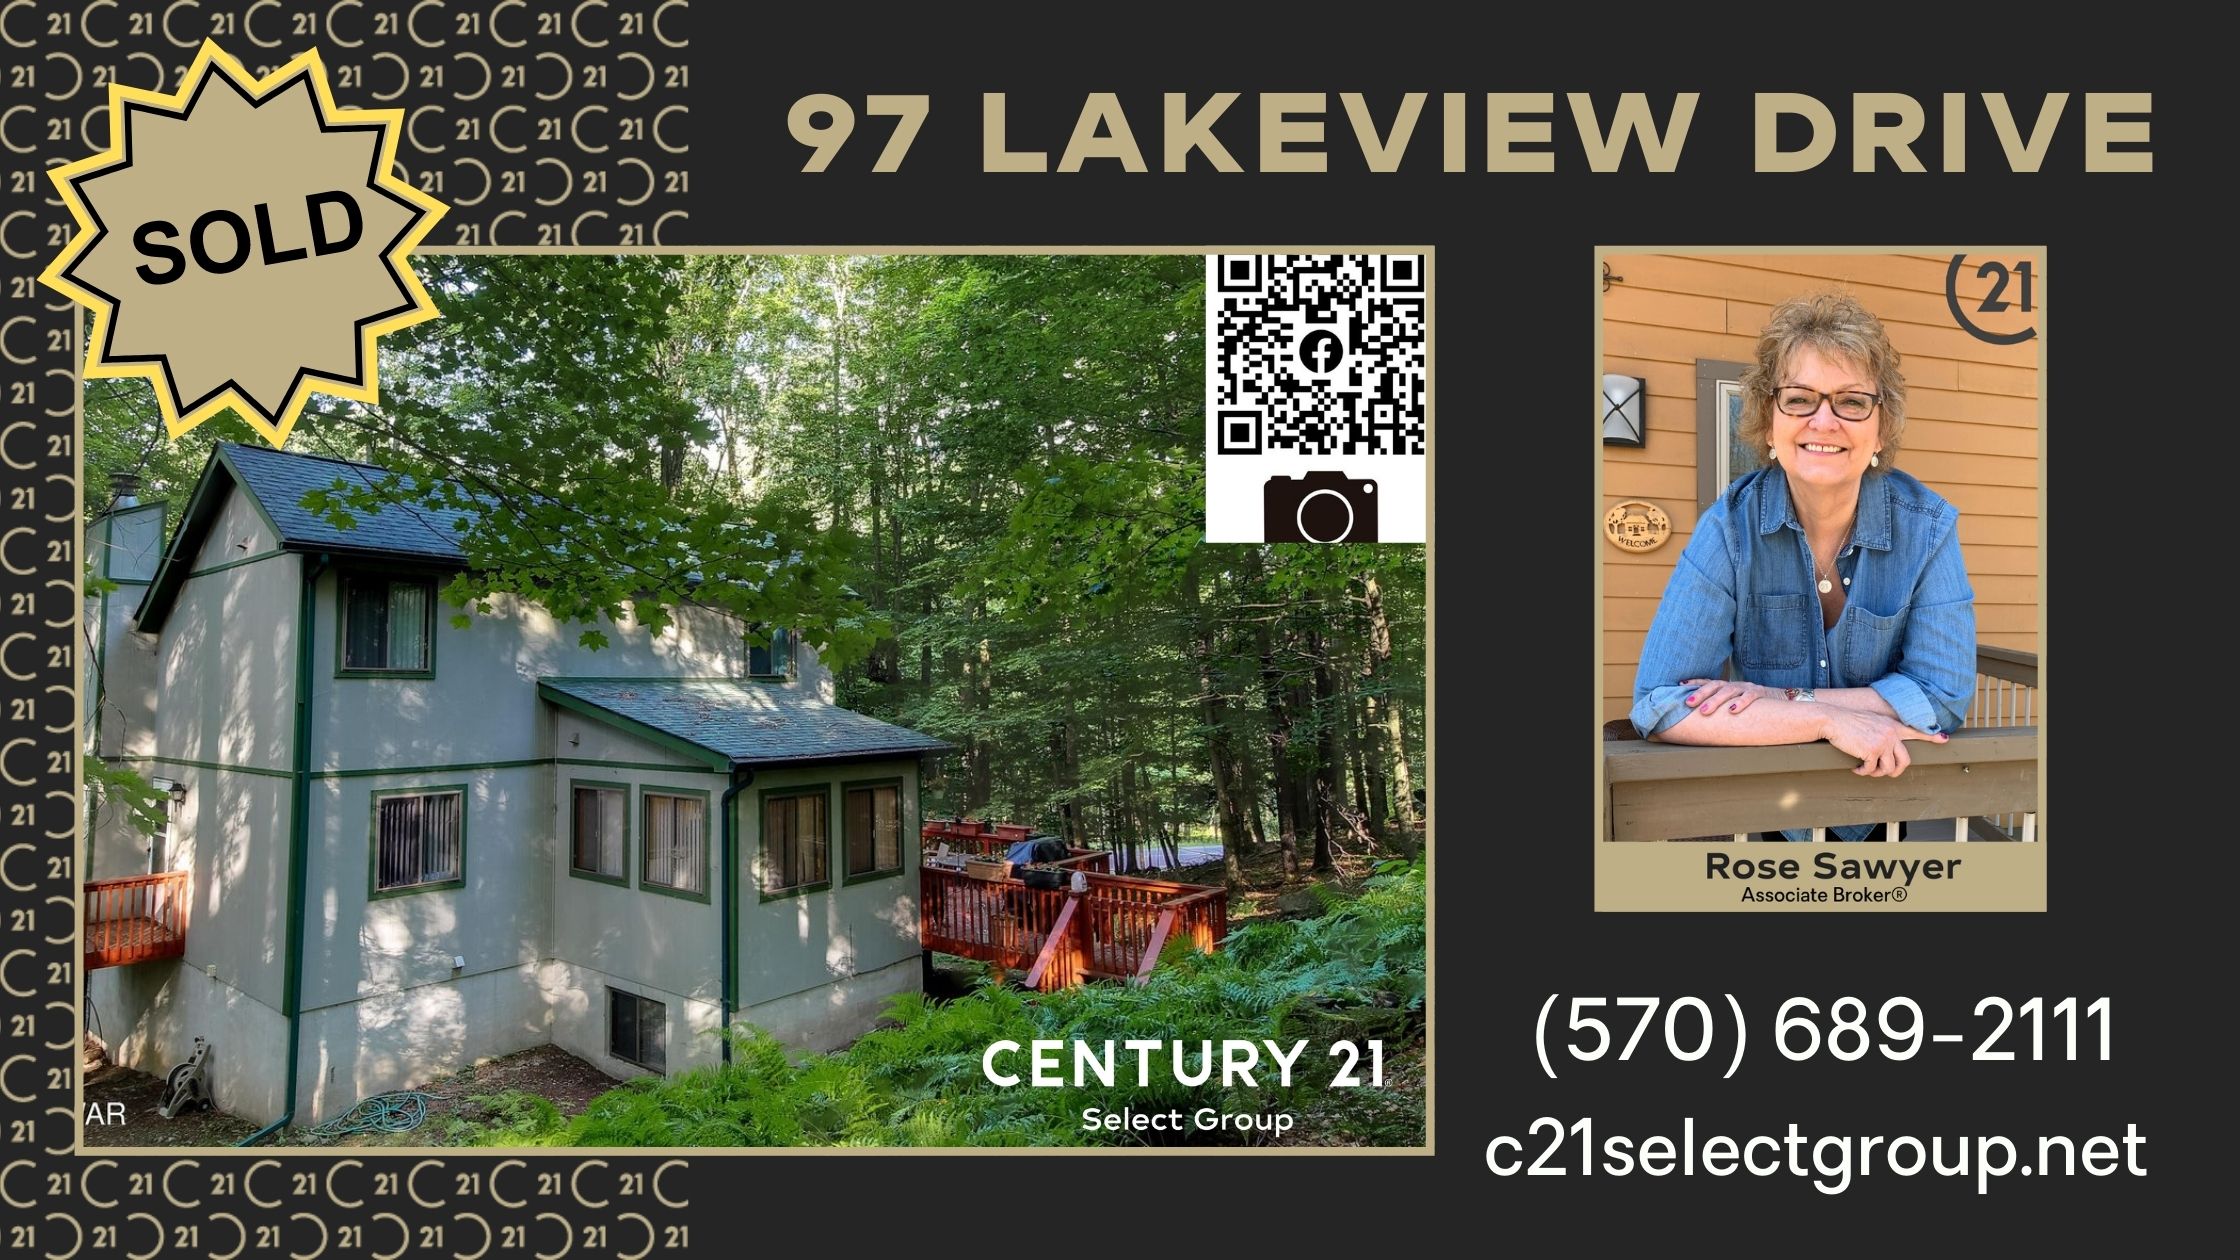 SOLD! 97 Lakeview Drive: The Hideout